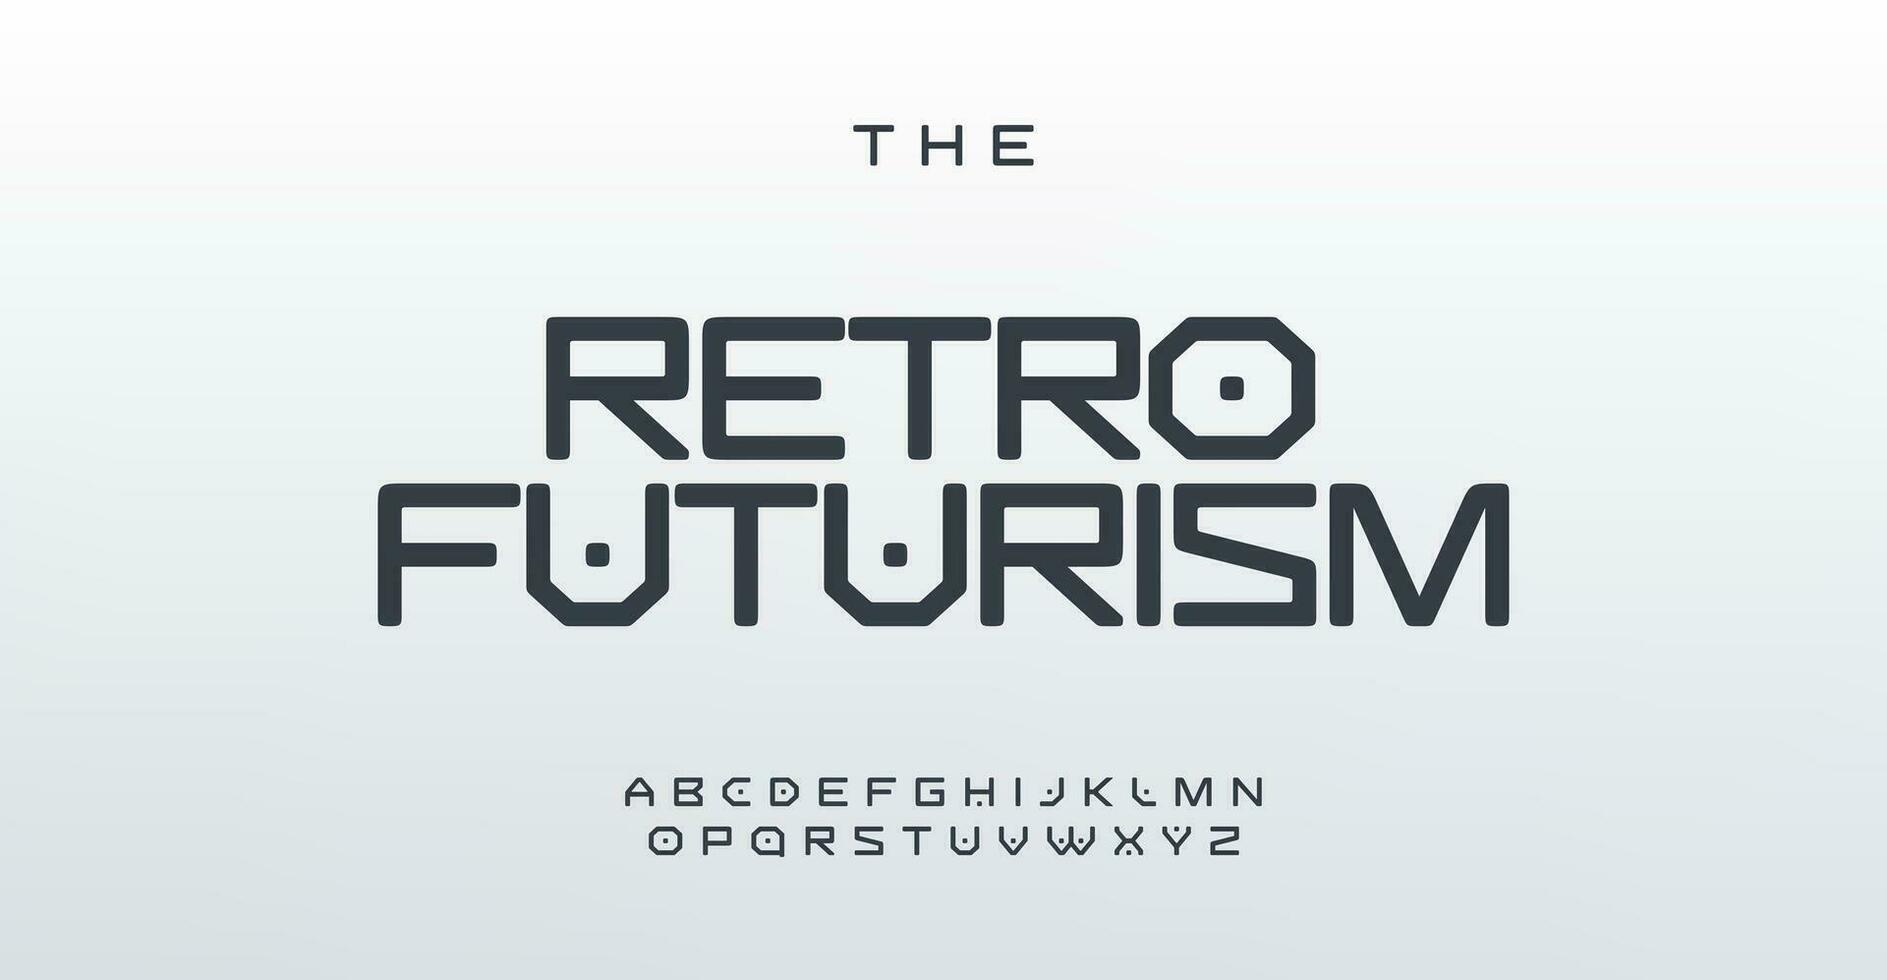 Sleek minimalistic font inspired by sci-fi aesthetics. Perfect for modern logos and contemporary designs. Embrace the future with this cosmic typographic solution. vector